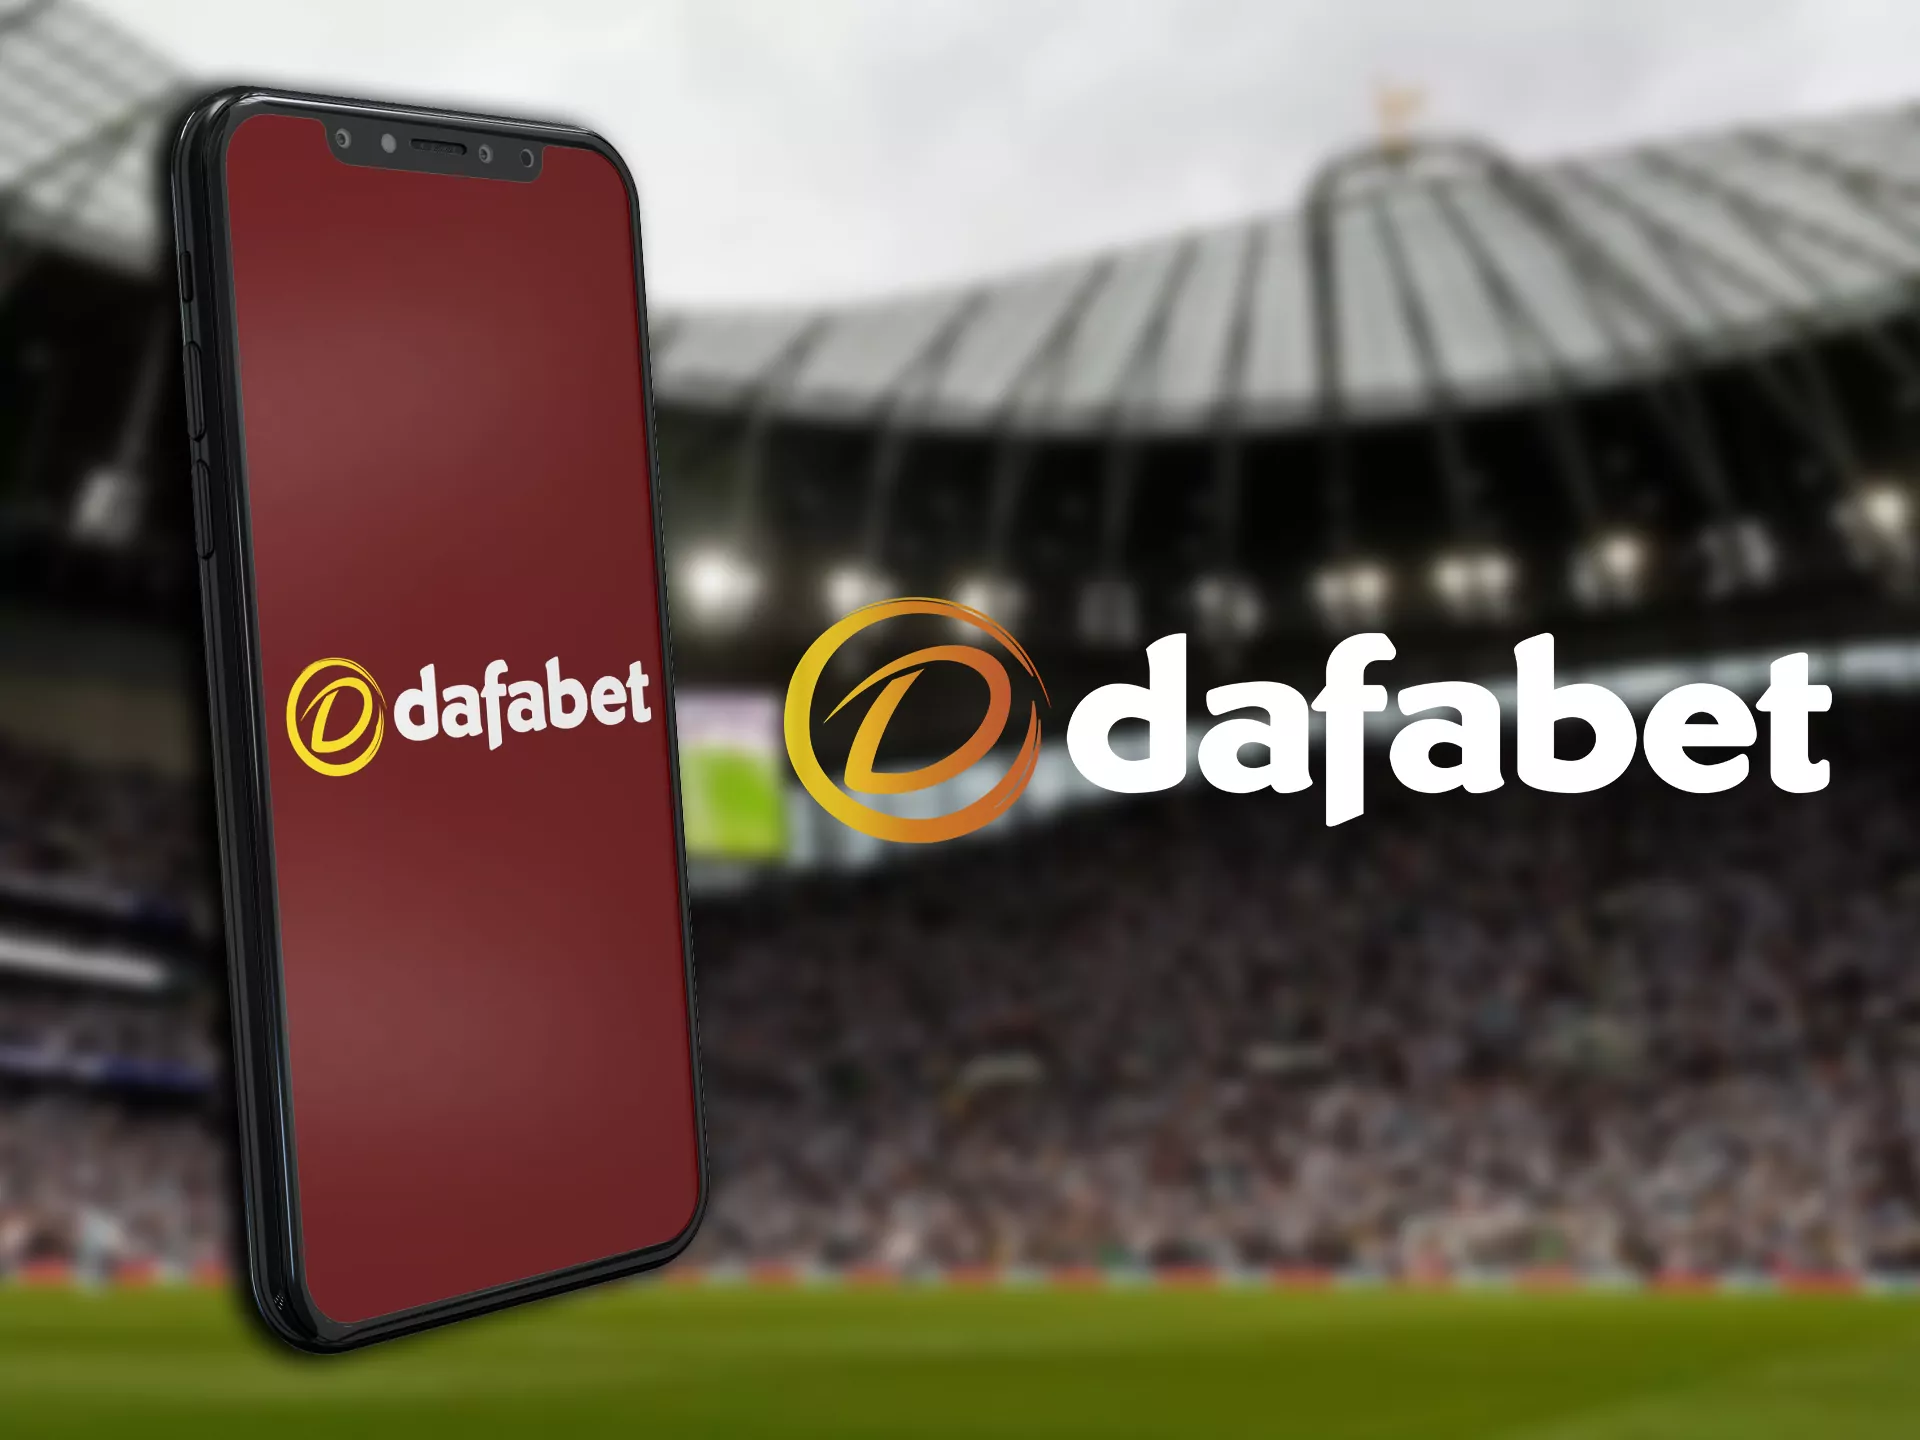 dafabet is a best soccer betting company.